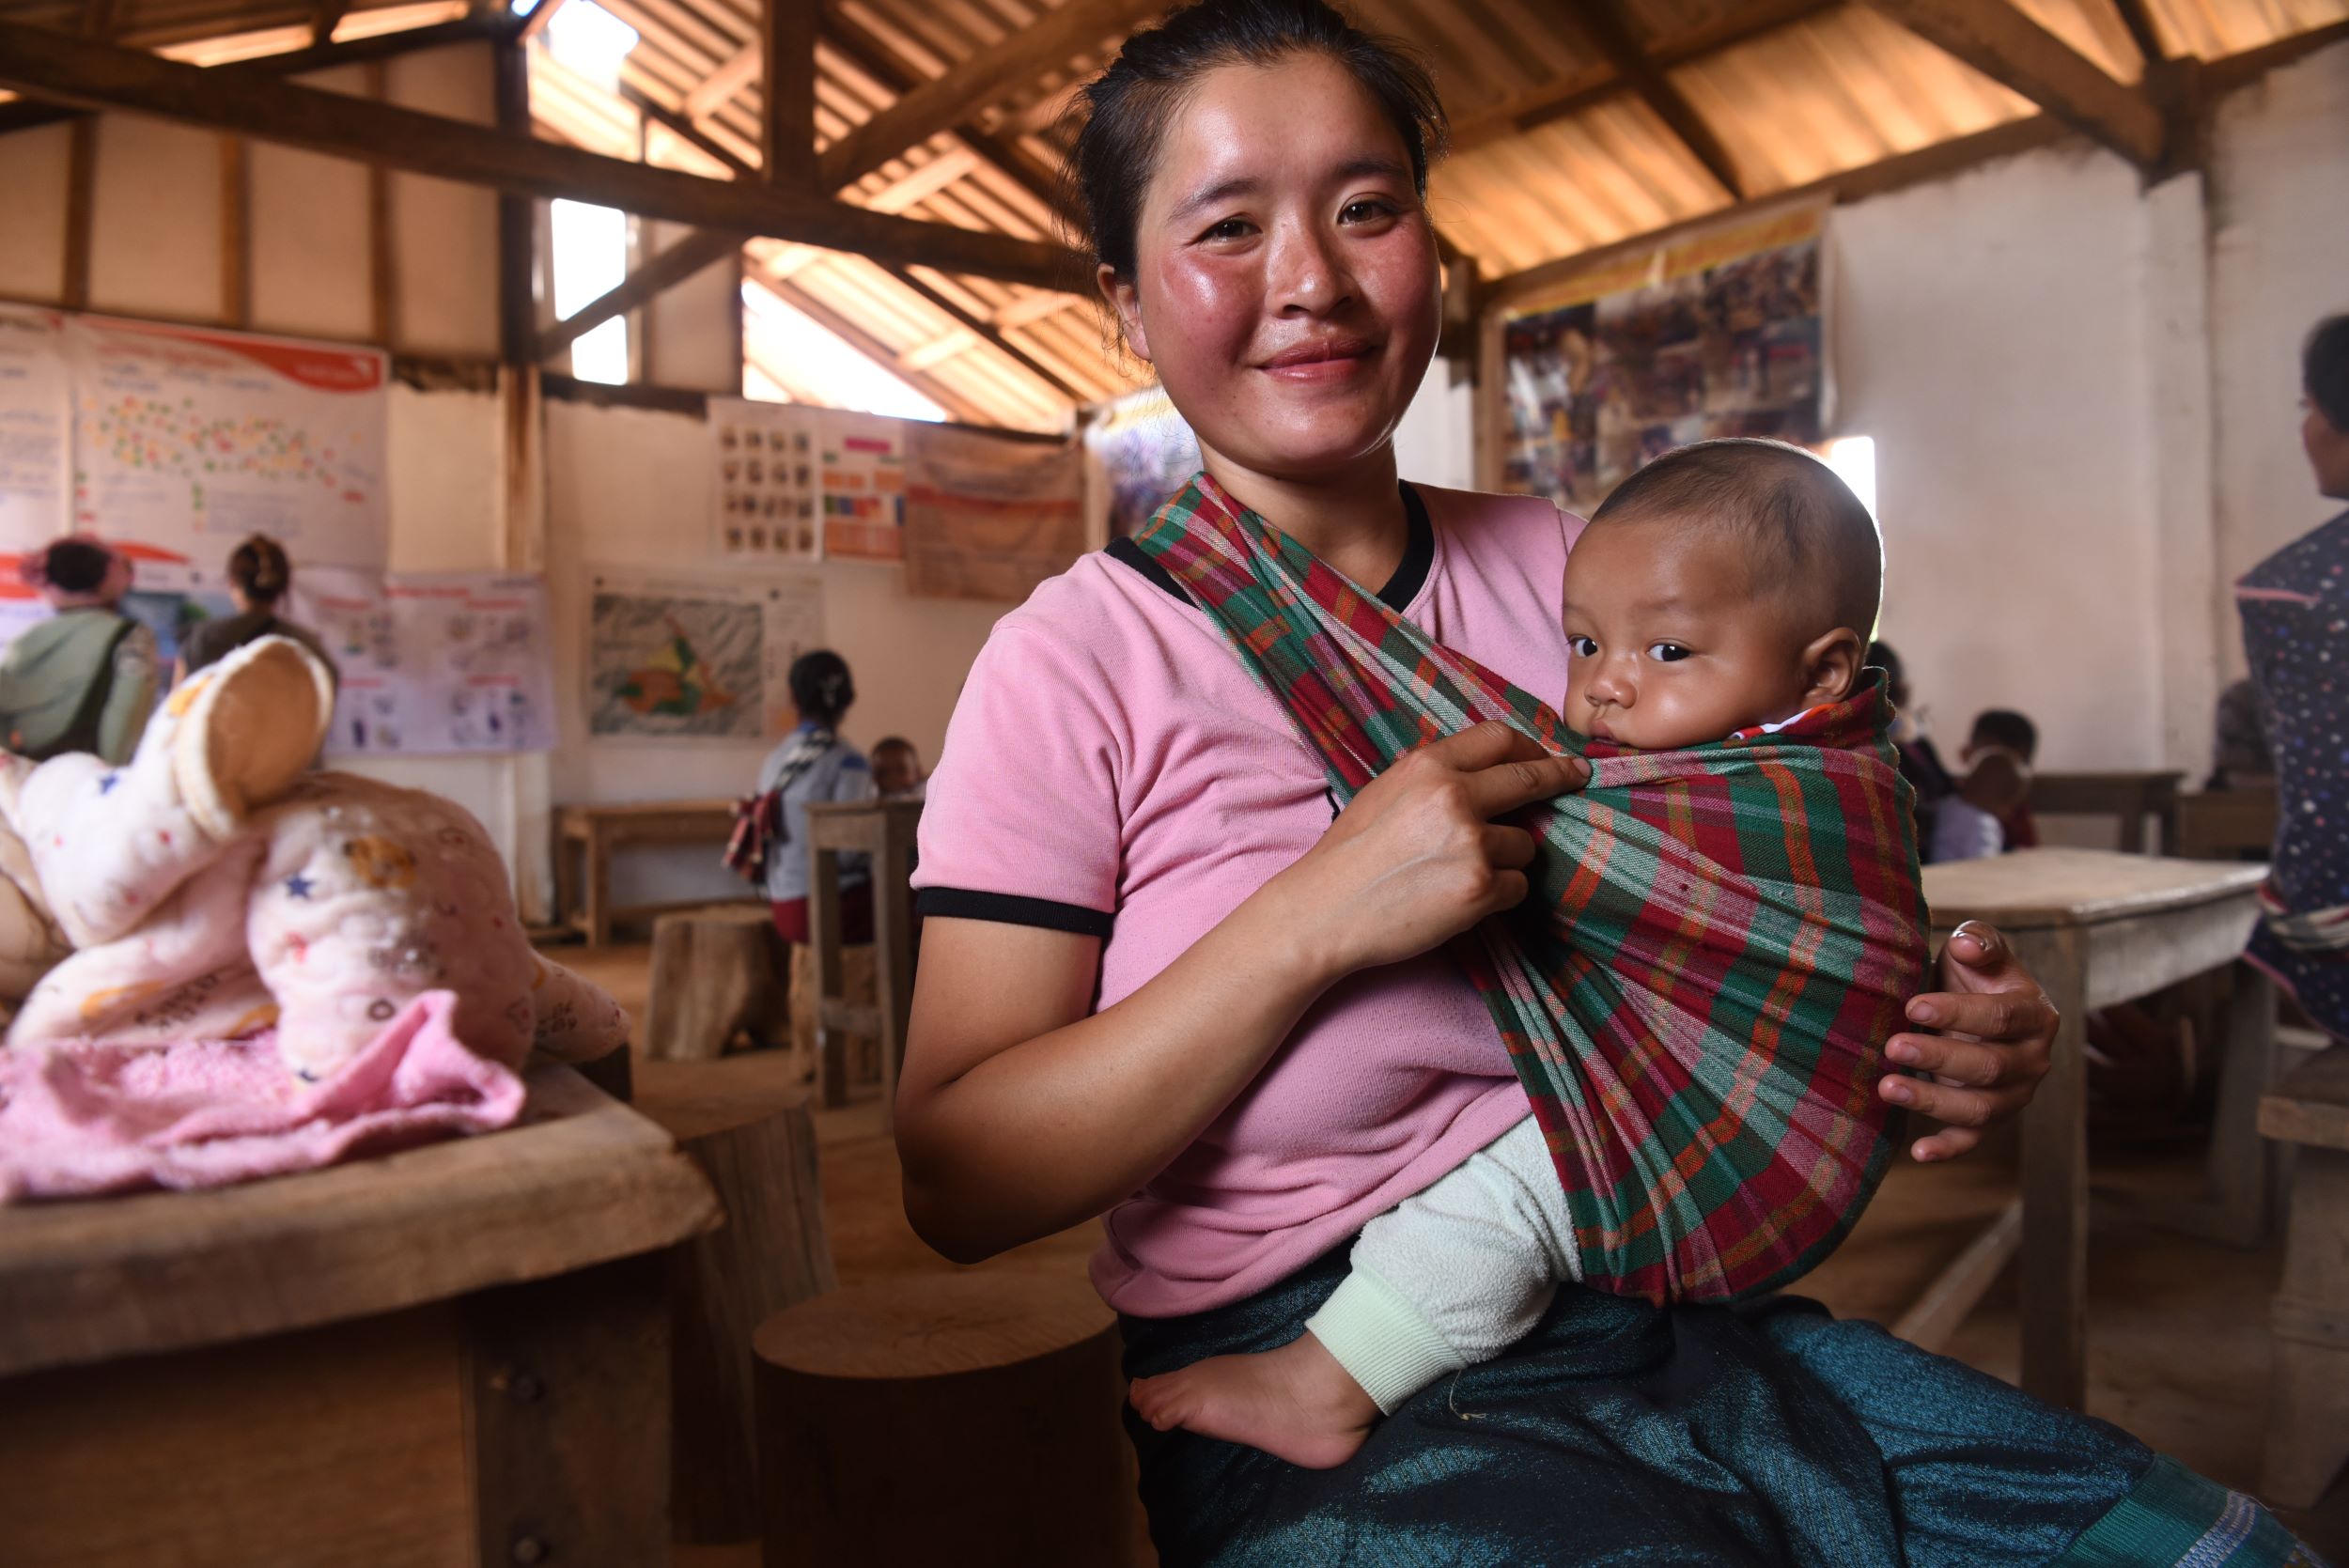 Smiling mother carrying her baby in a sling, Laos